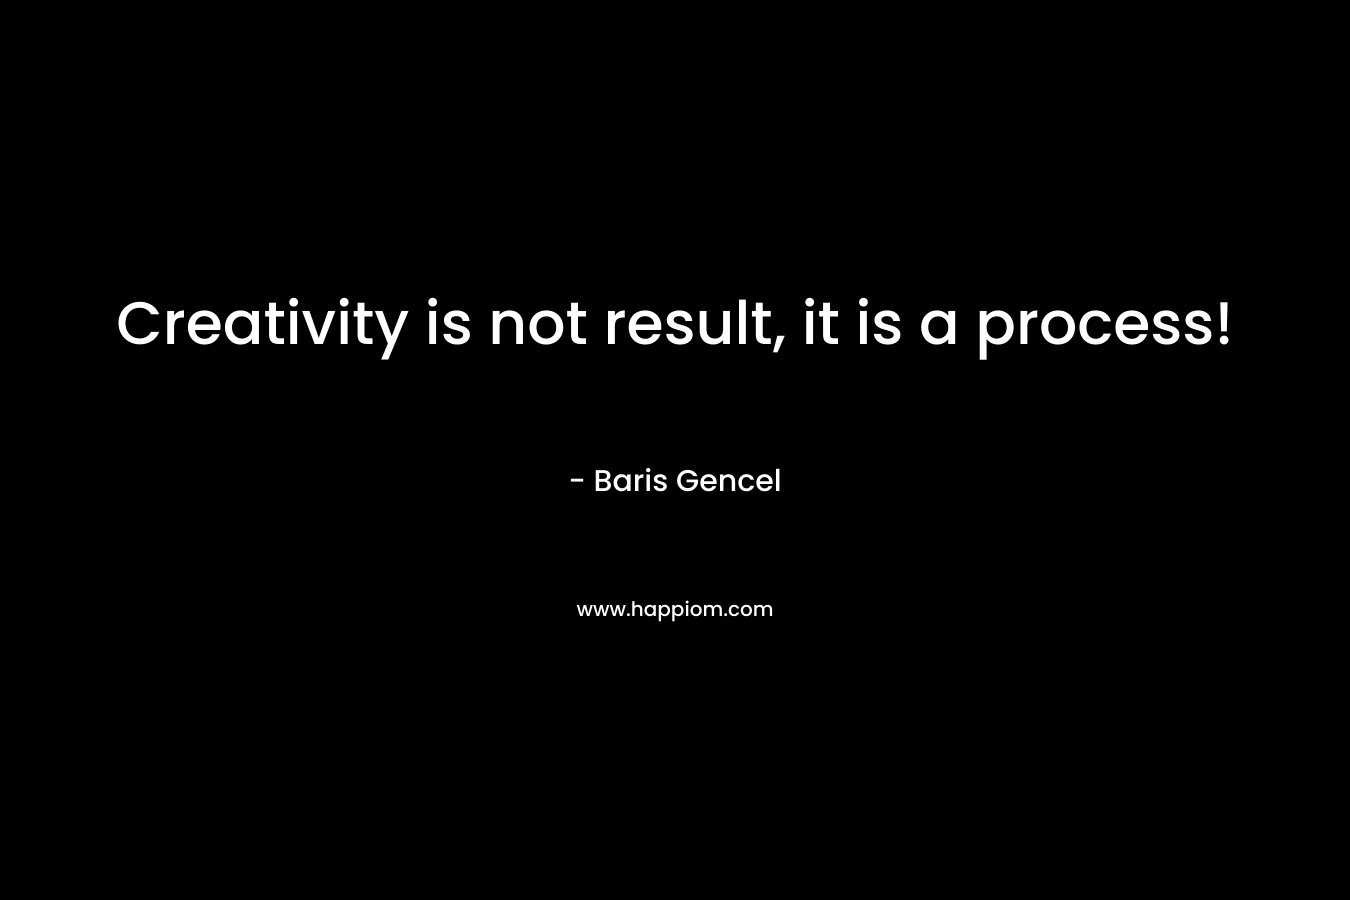 Creativity is not result, it is a process!